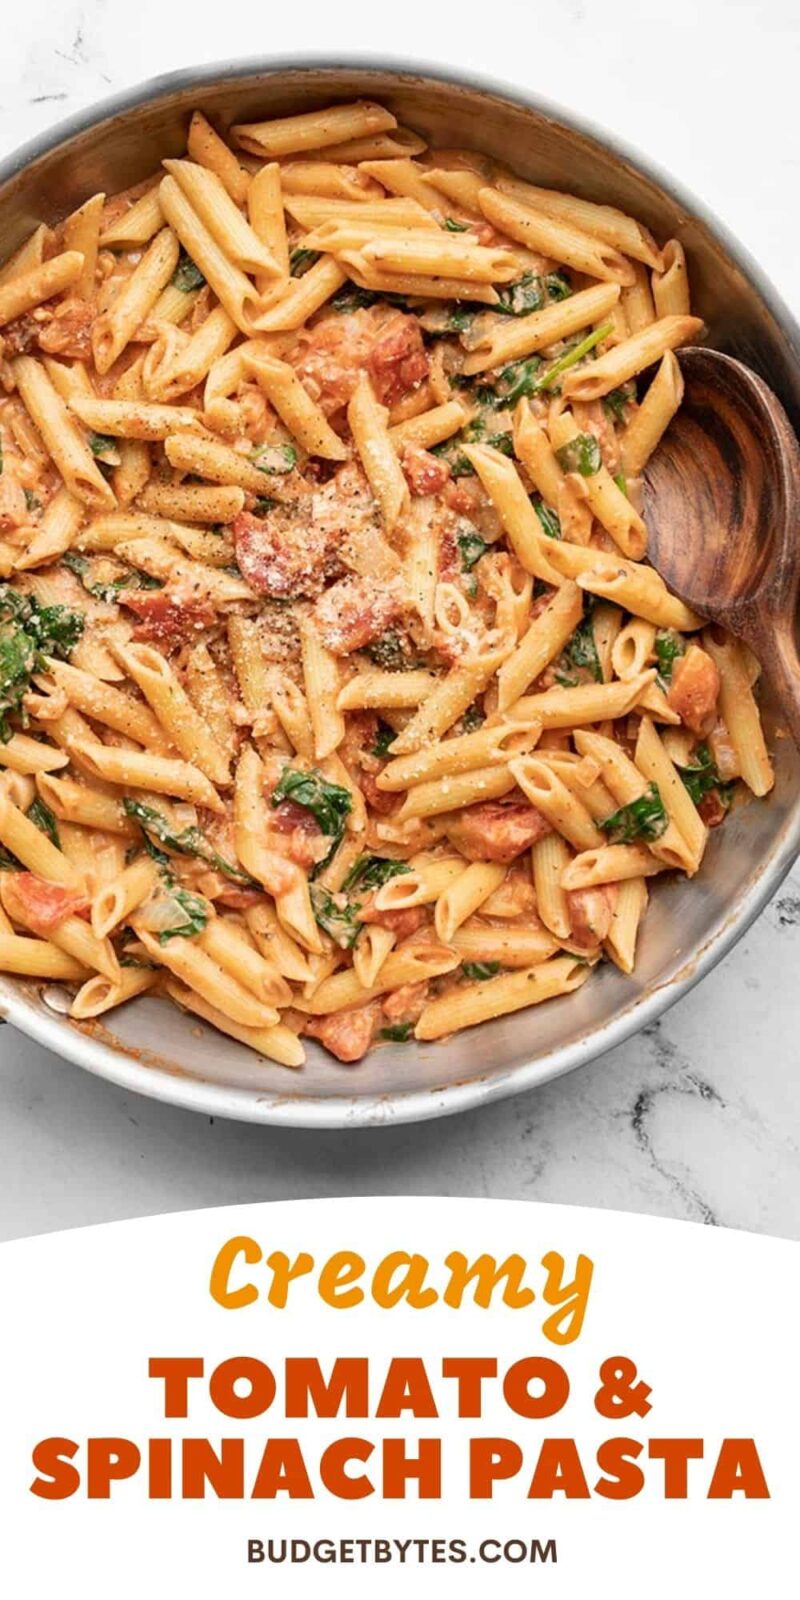 VIRAL Creamy Tomato and Spinach Pasta - Budget Bytes